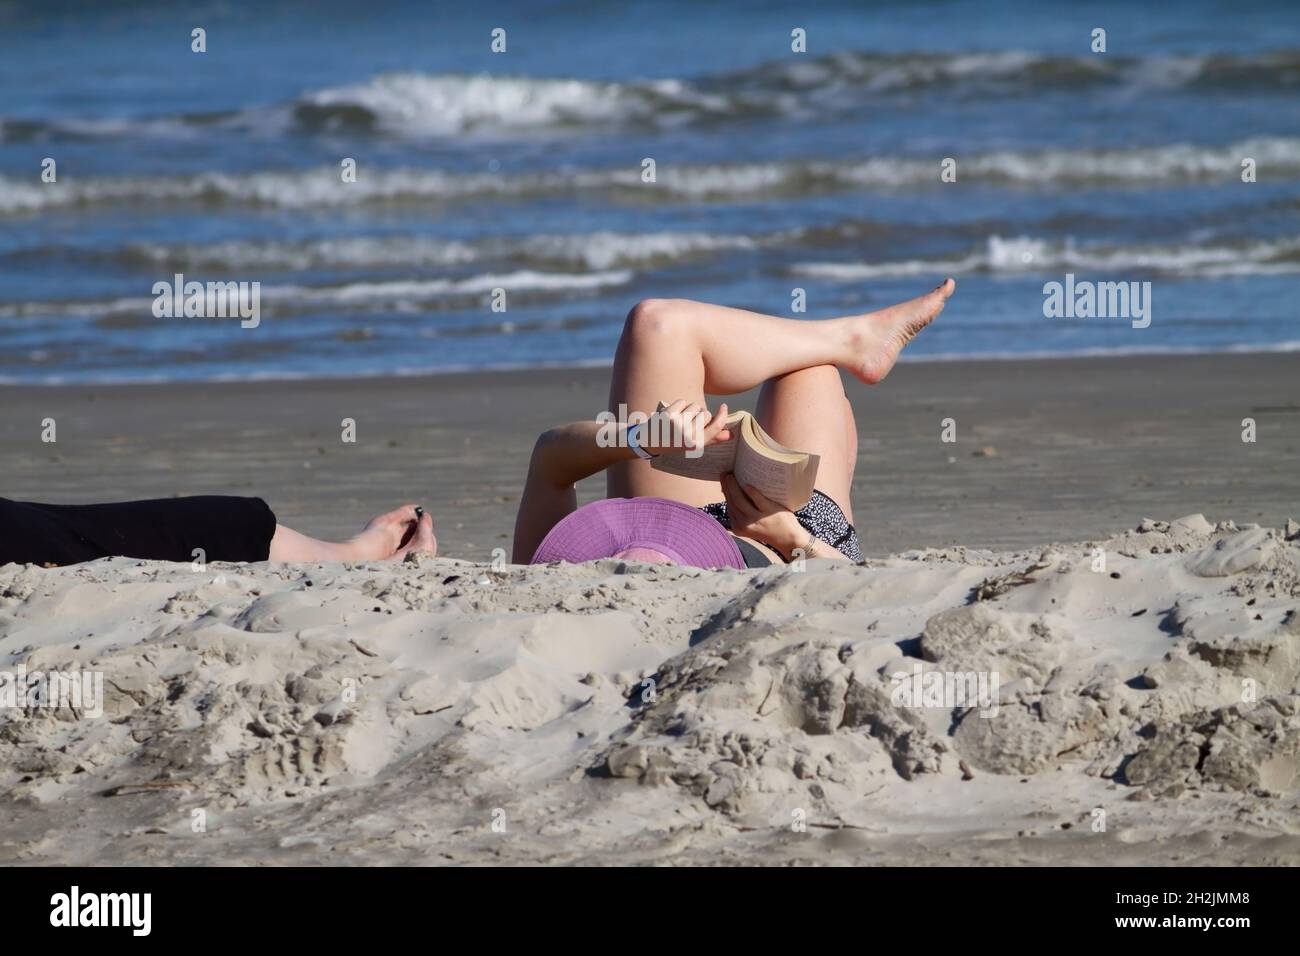 Caucasian female reading reclined on Port Aransas, Texas beach. Crossed legs, arms and open book visible. Feet of companion also visible in frame. Stock Photo